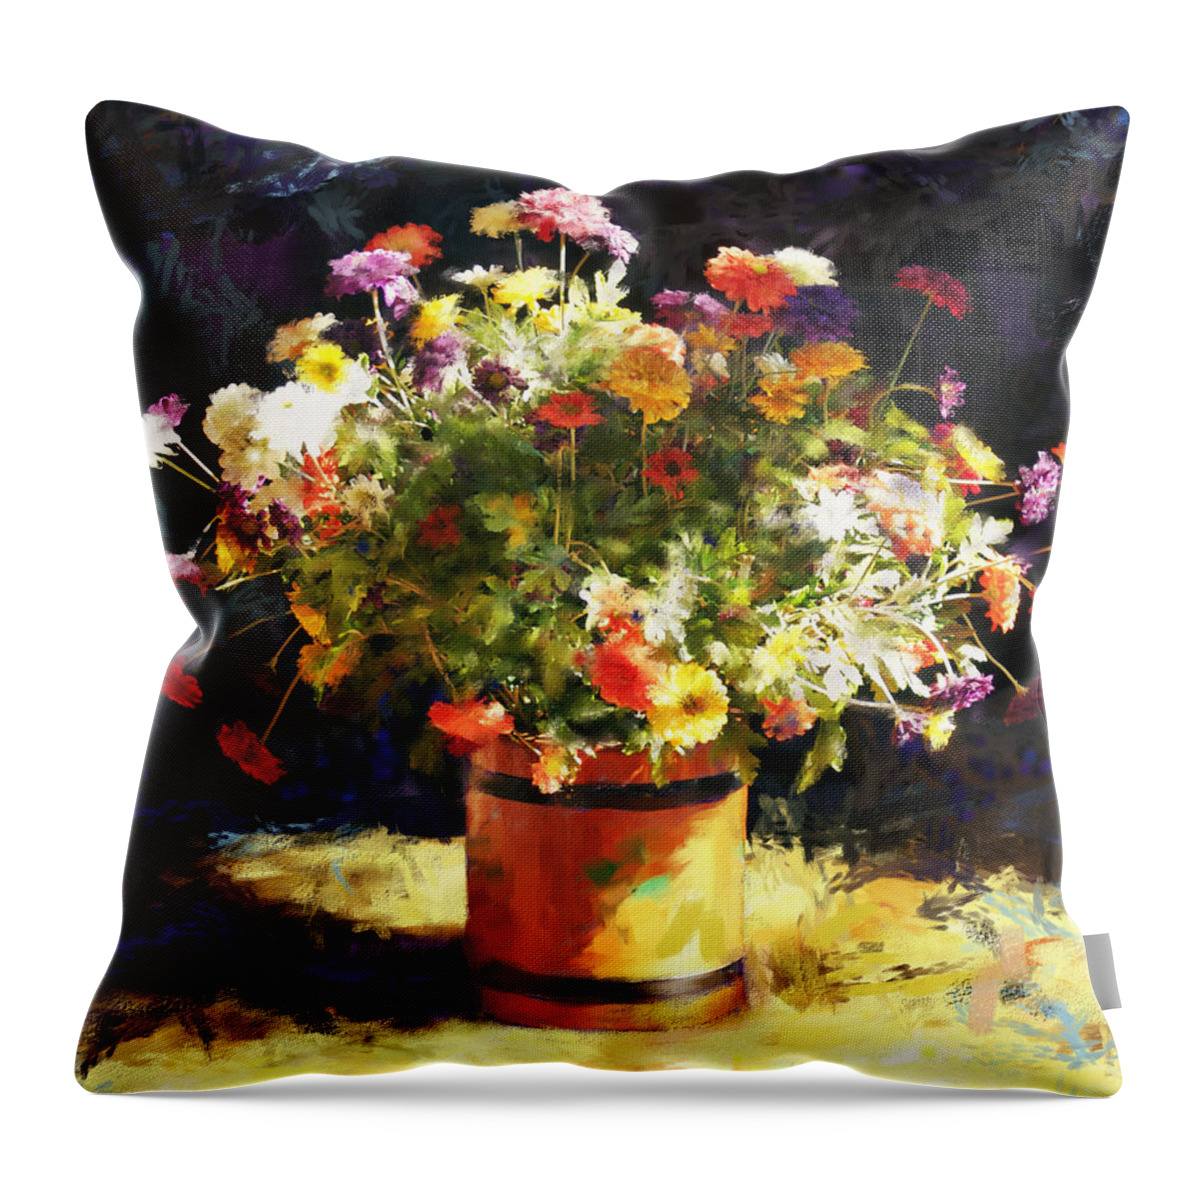 Flowers Throw Pillow featuring the painting Summer Flowers by Sandra Selle Rodriguez